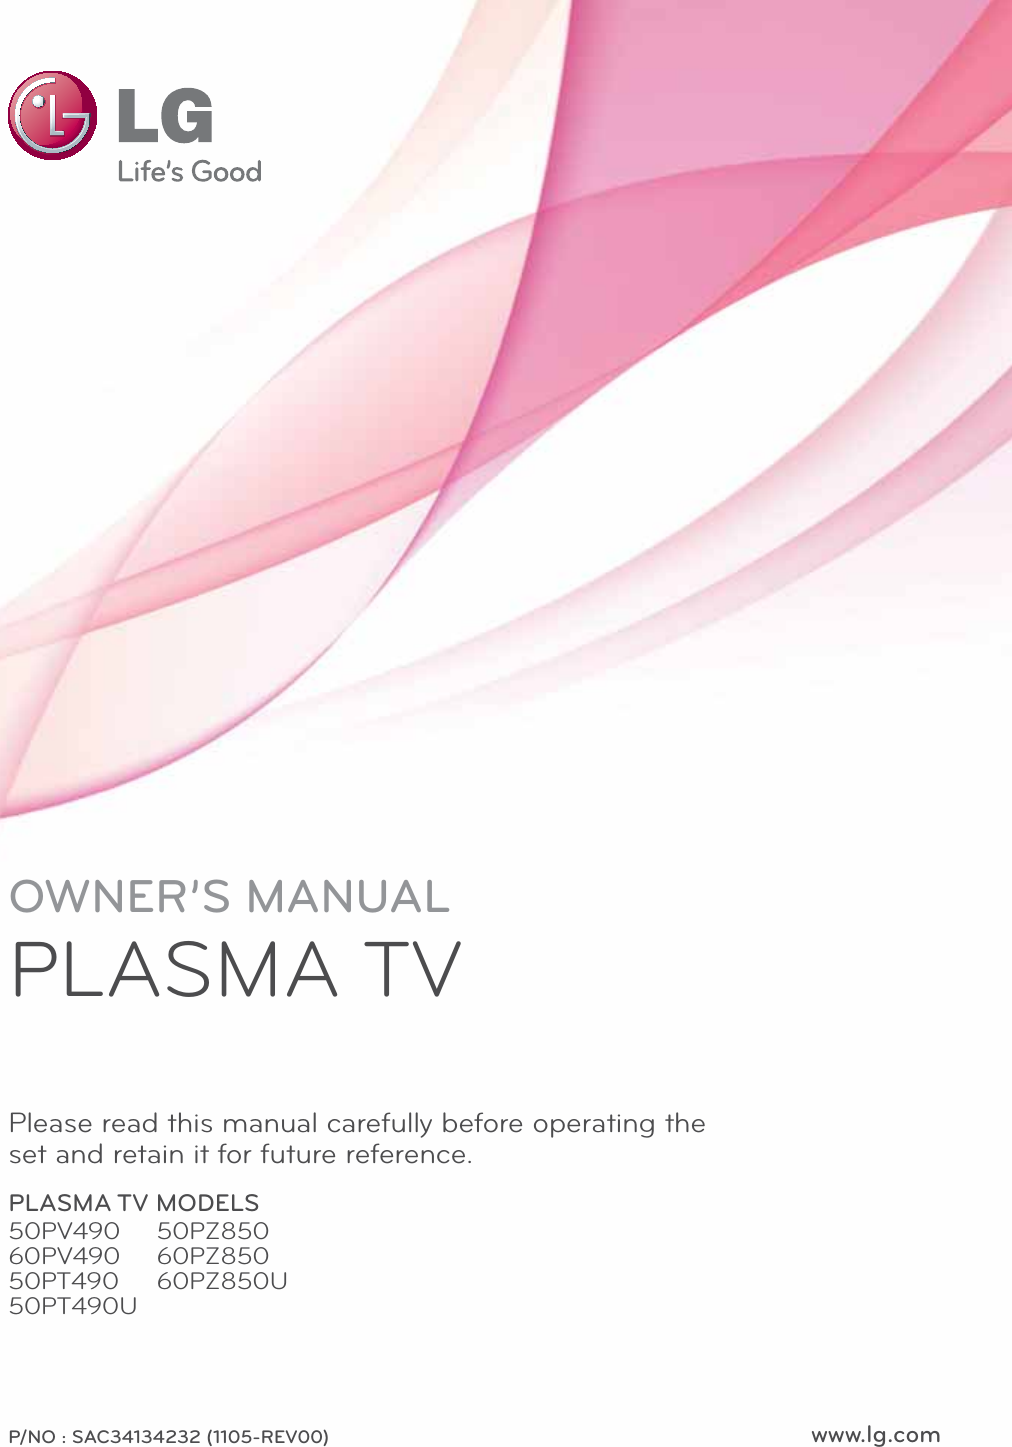 www.lg.comP/NO : SAC34134232 (1105-REV00)OWNER’S MANUAL PLASMA TVPlease read this manual carefully before operating the set and retain it for future reference.PLASMA TV MODELS50PV49060PV49050PT49050PT490U50PZ85060PZ85060PZ850U